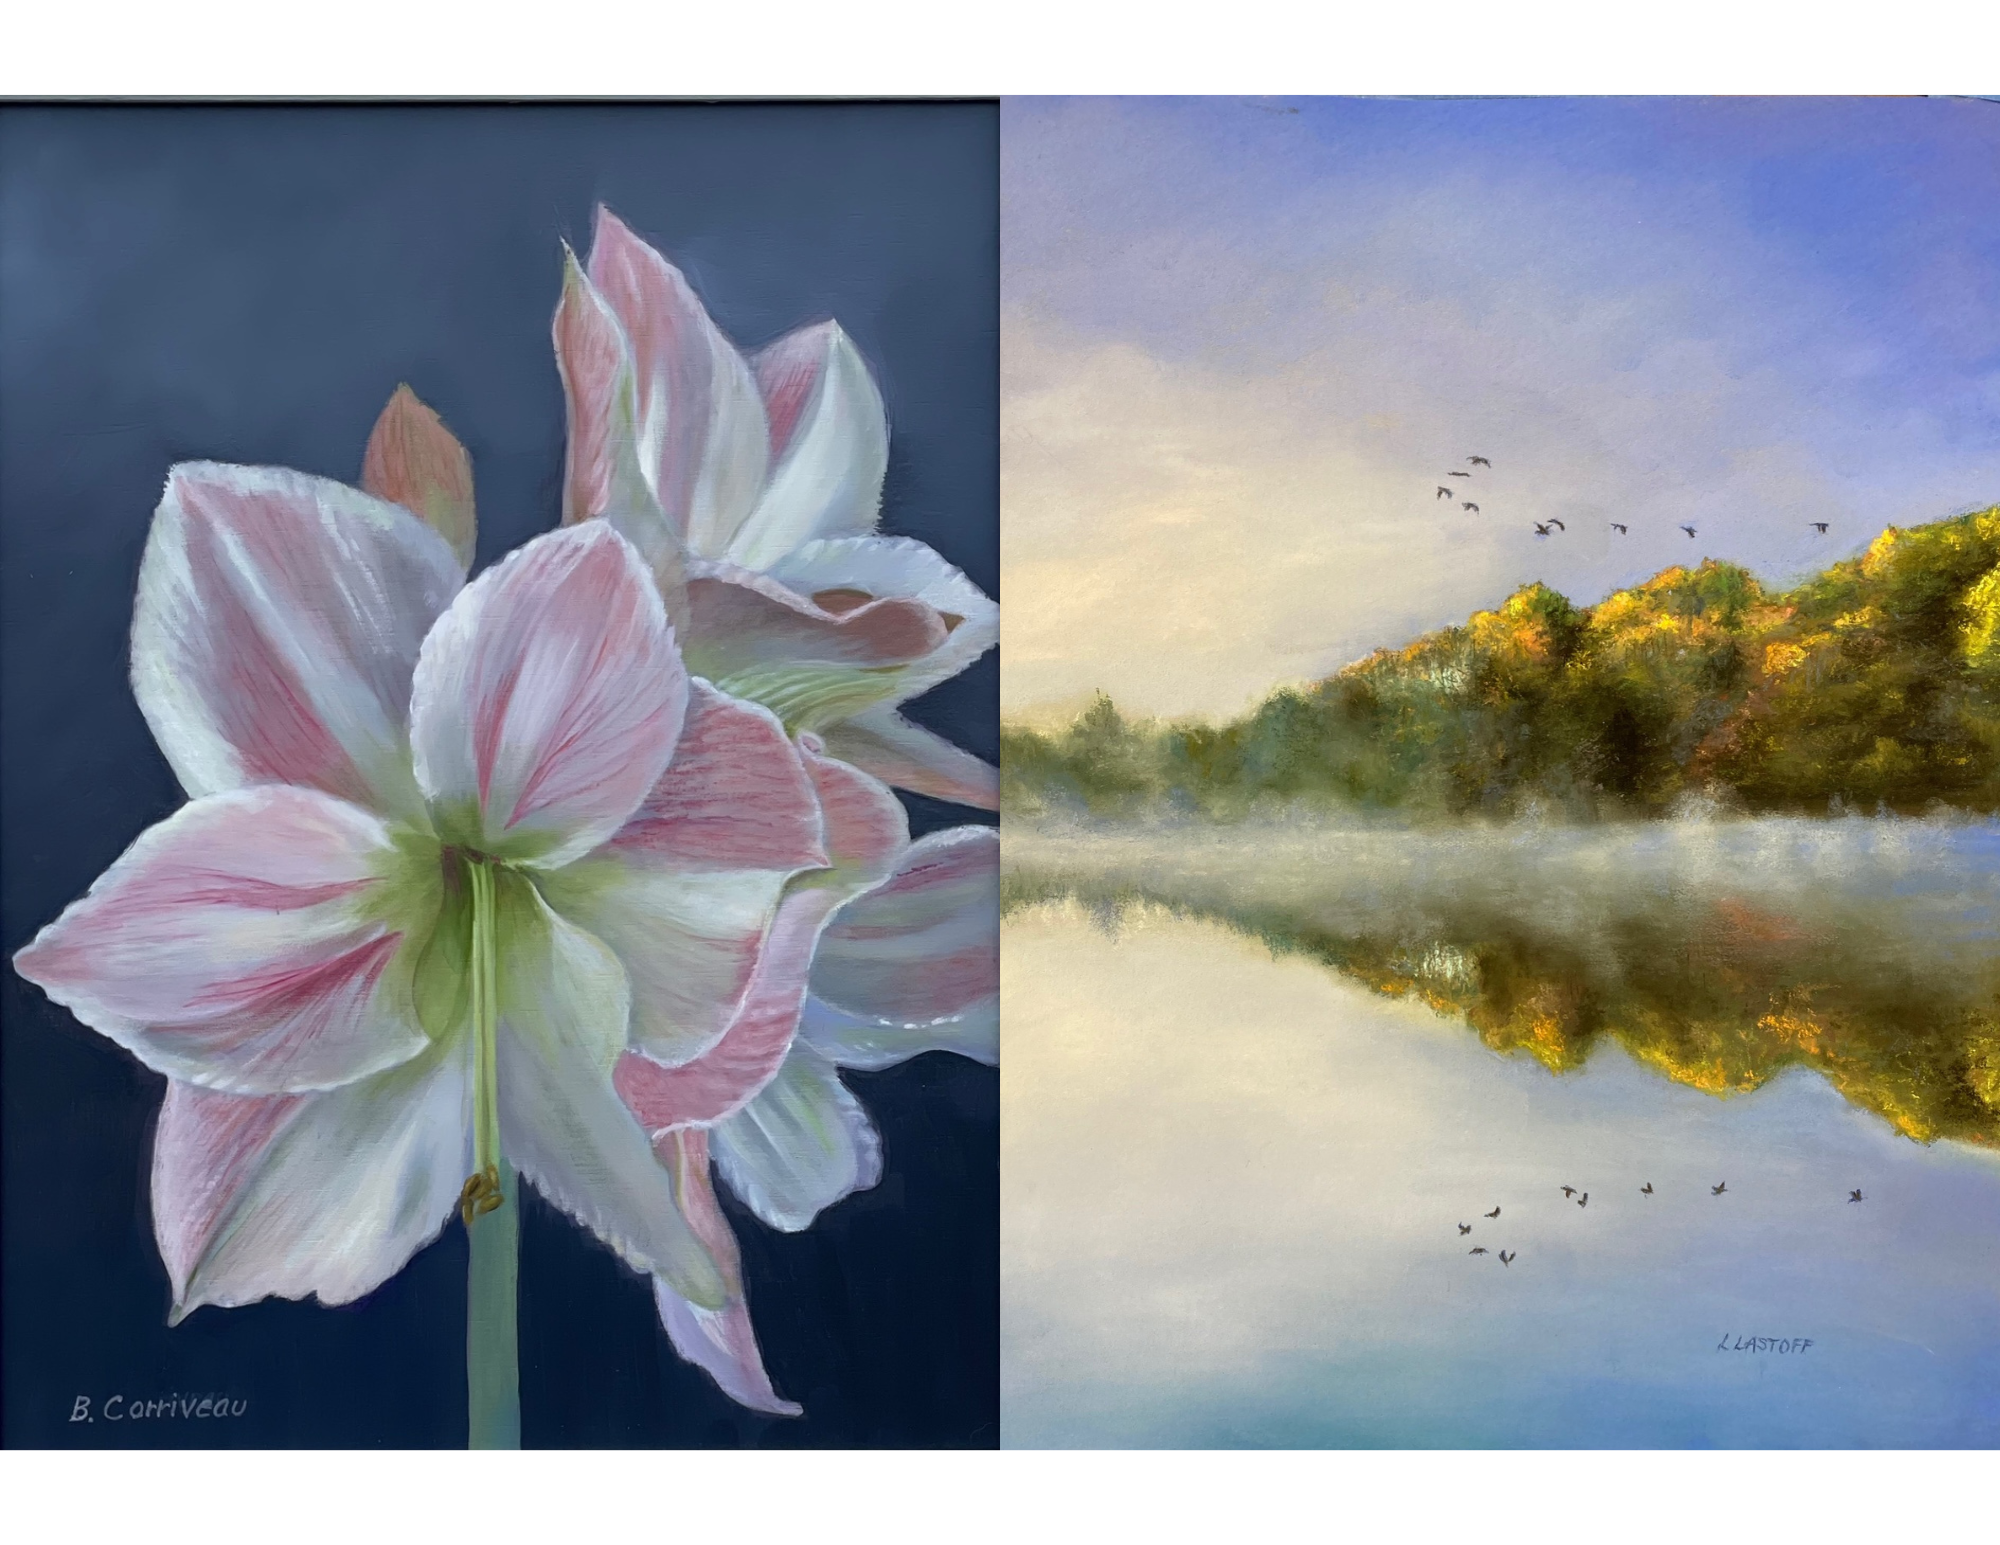 two painting next to each other, one of a pink and white flower, one of a lake scene with trees, birds, and a lake.